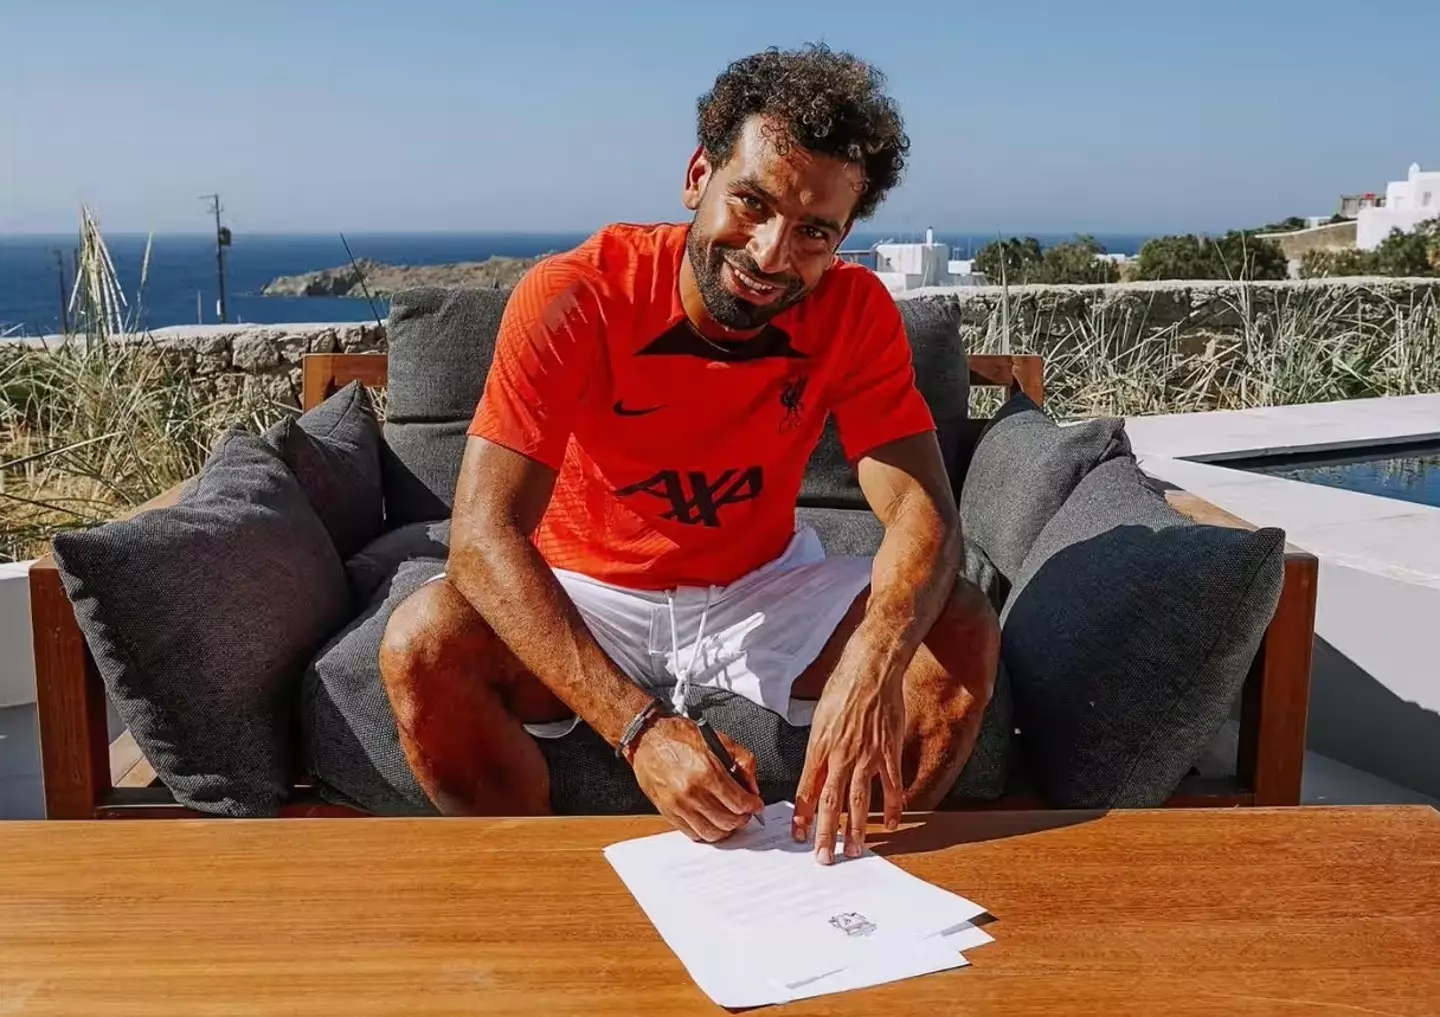 Apparently after years of negotiation, Salah signed a new contract with Liverpool last year.